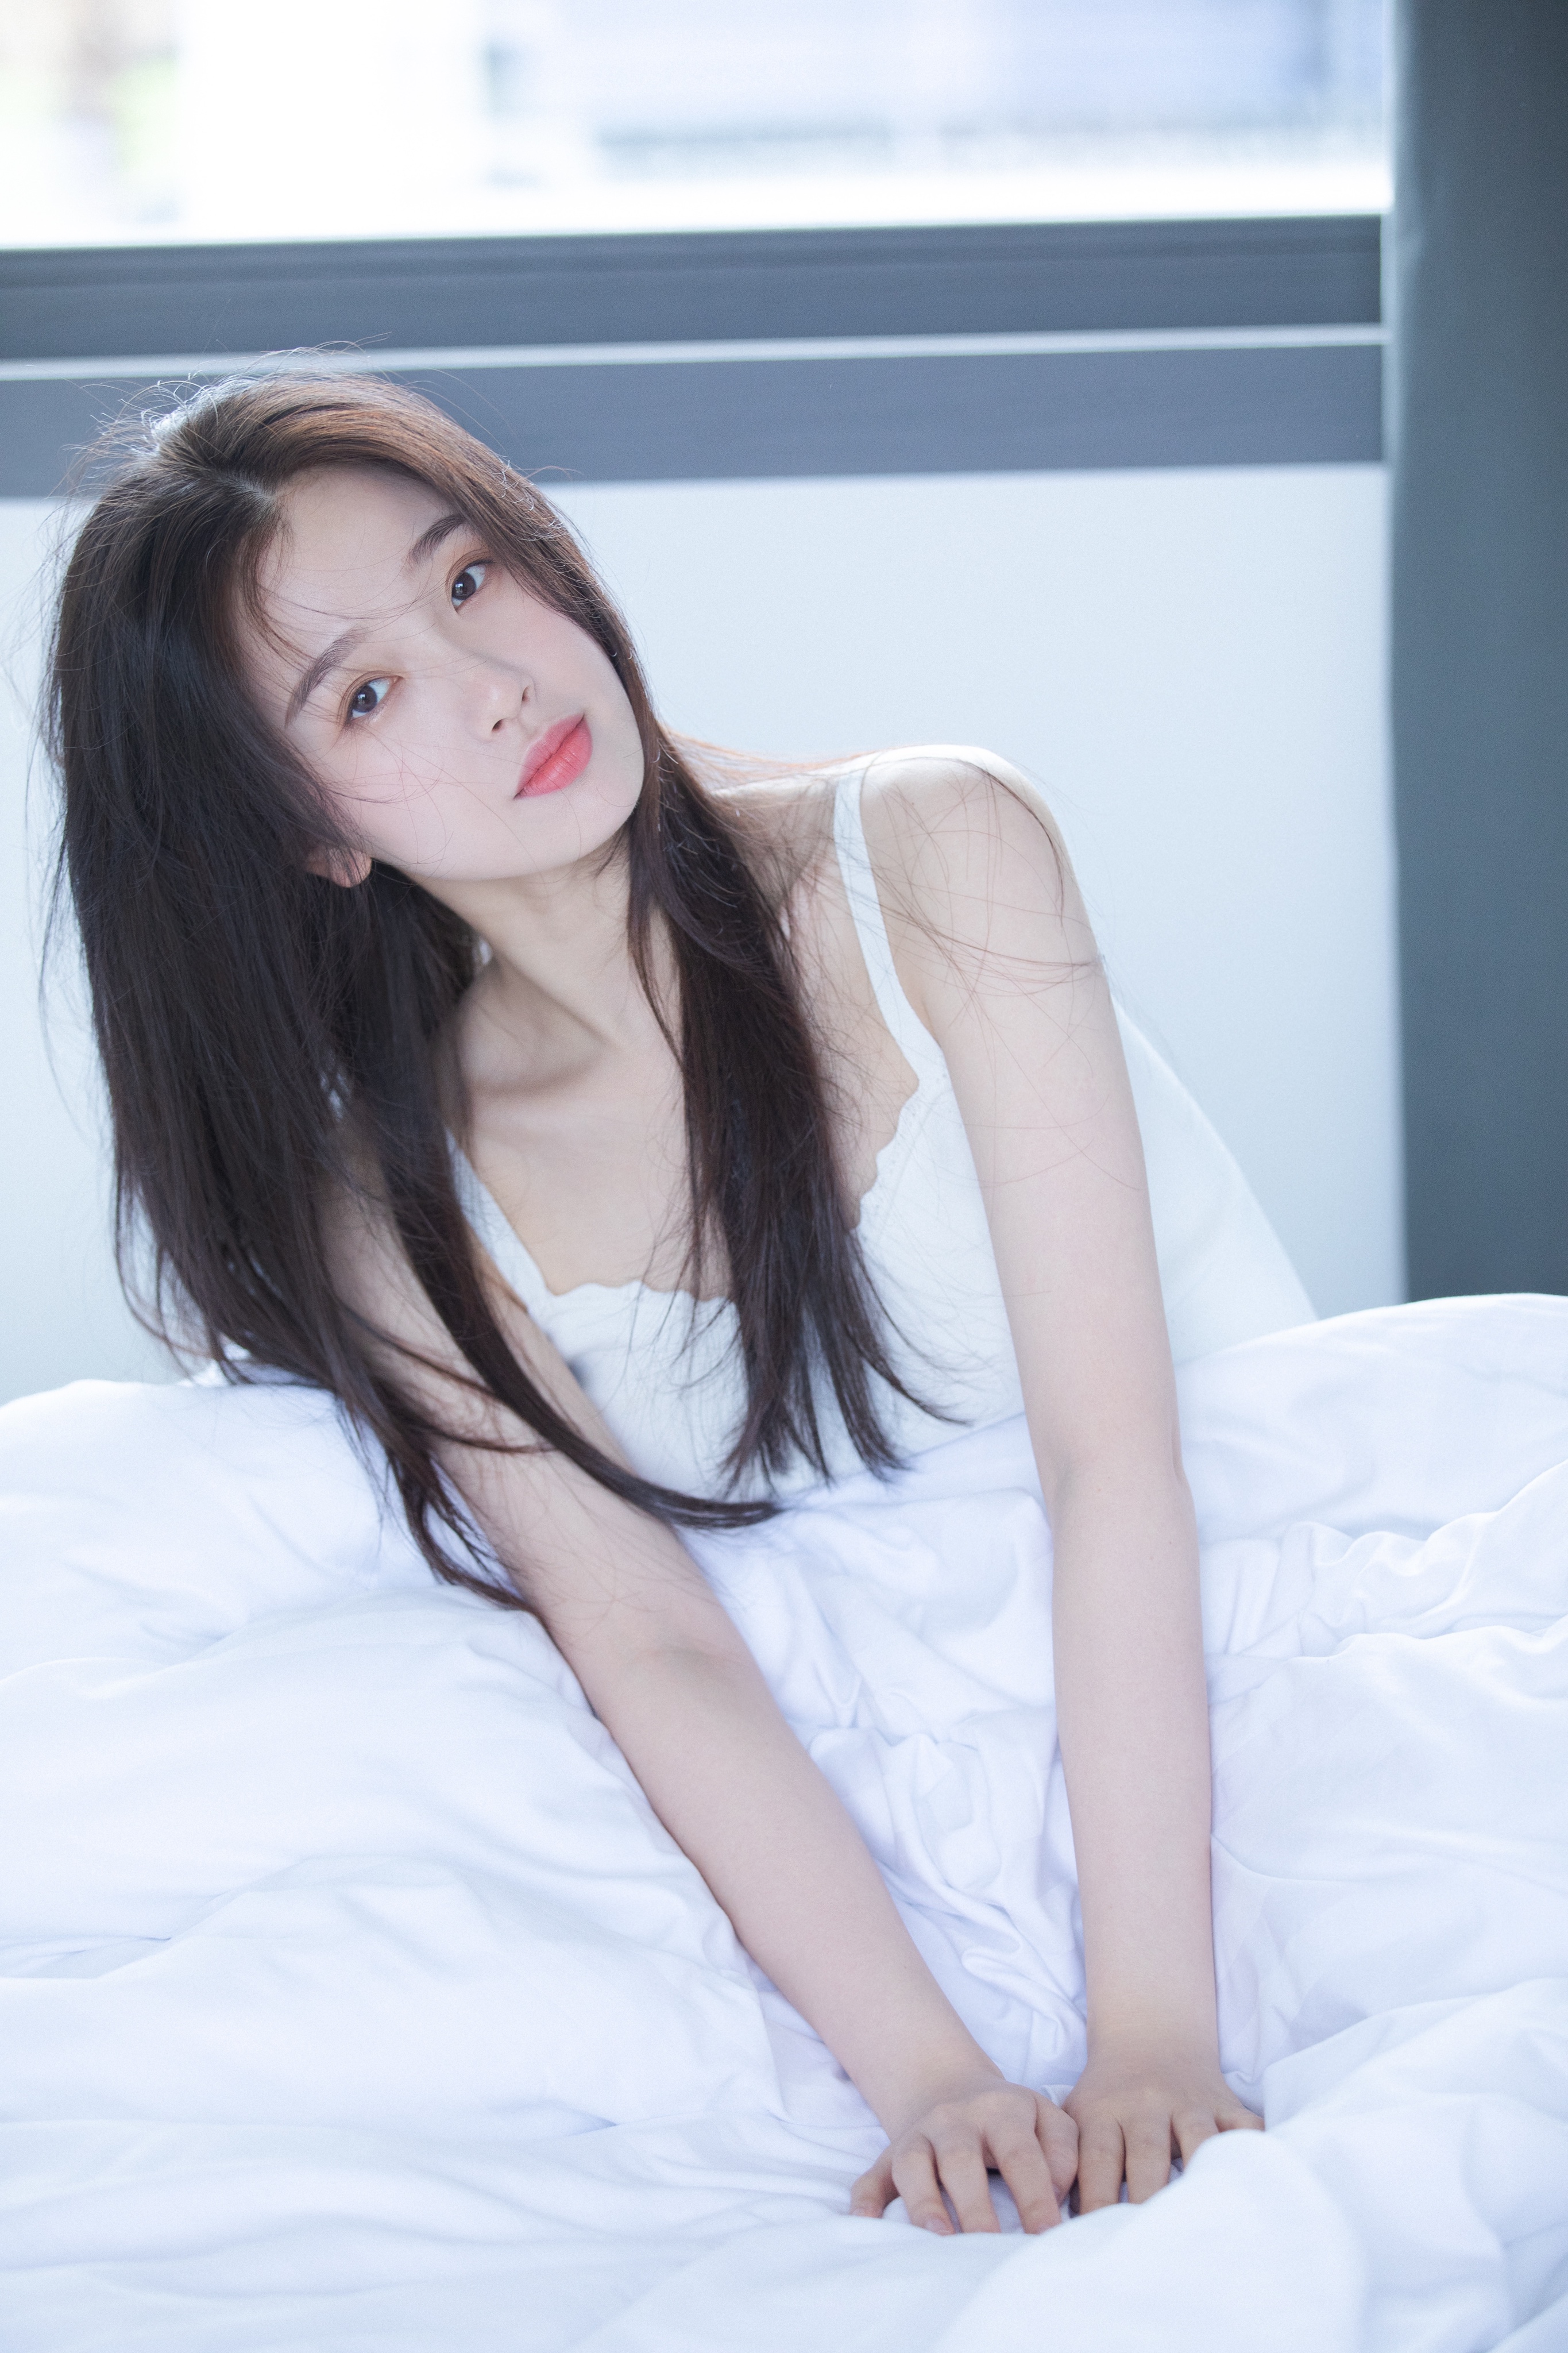 People 2730x4096 Chinese women indoors bare shoulders pale in bed white clothing black hair long hair window red lipstick lips looking at viewer women model brunette Asian portrait display